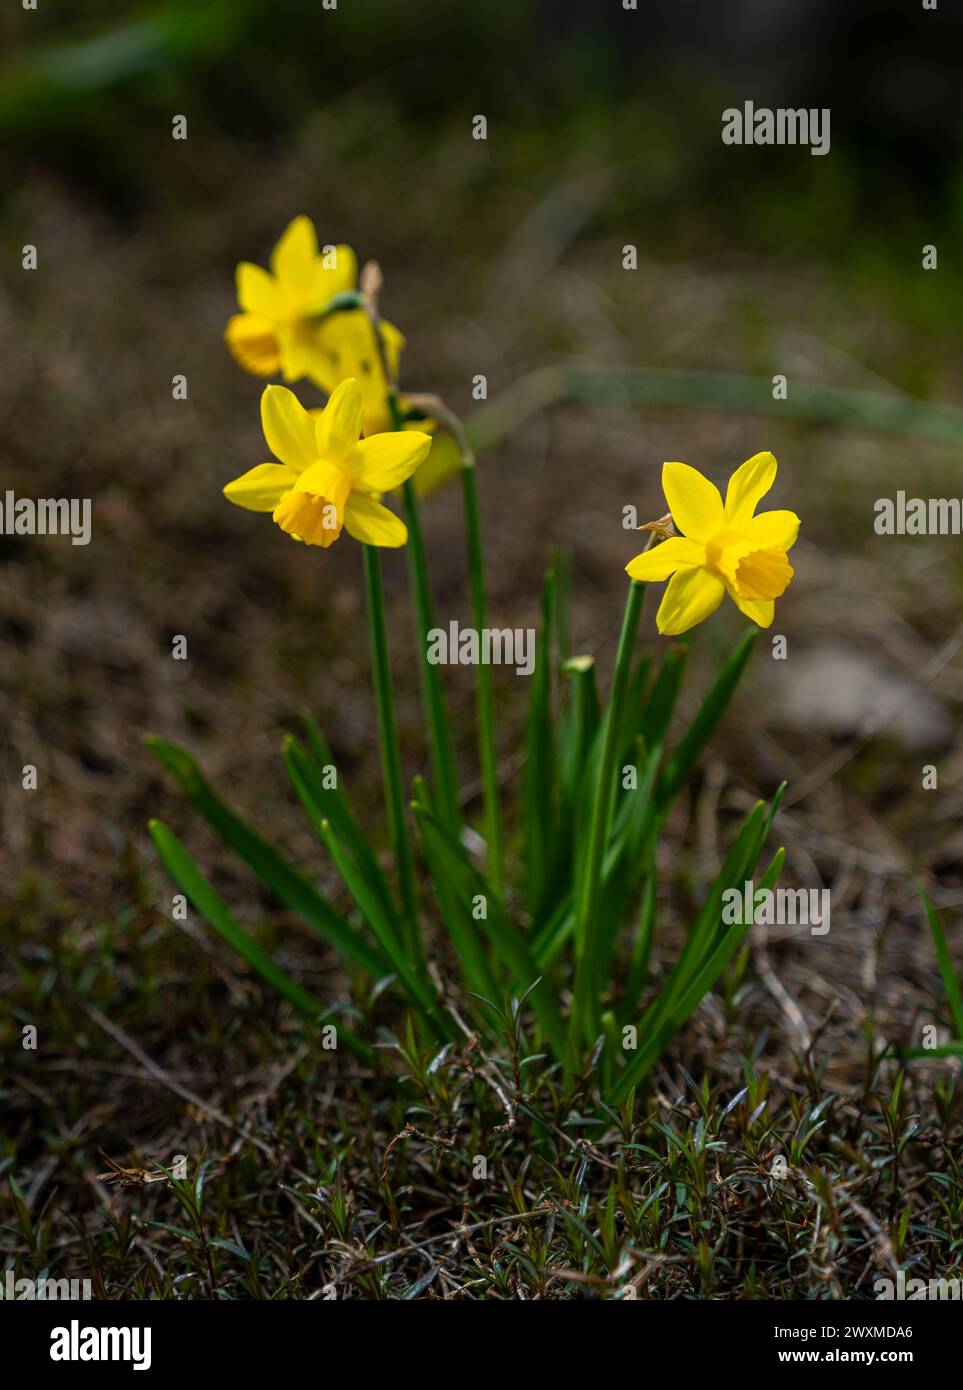 Yellow flowers with long stems among green grass Stock Photo